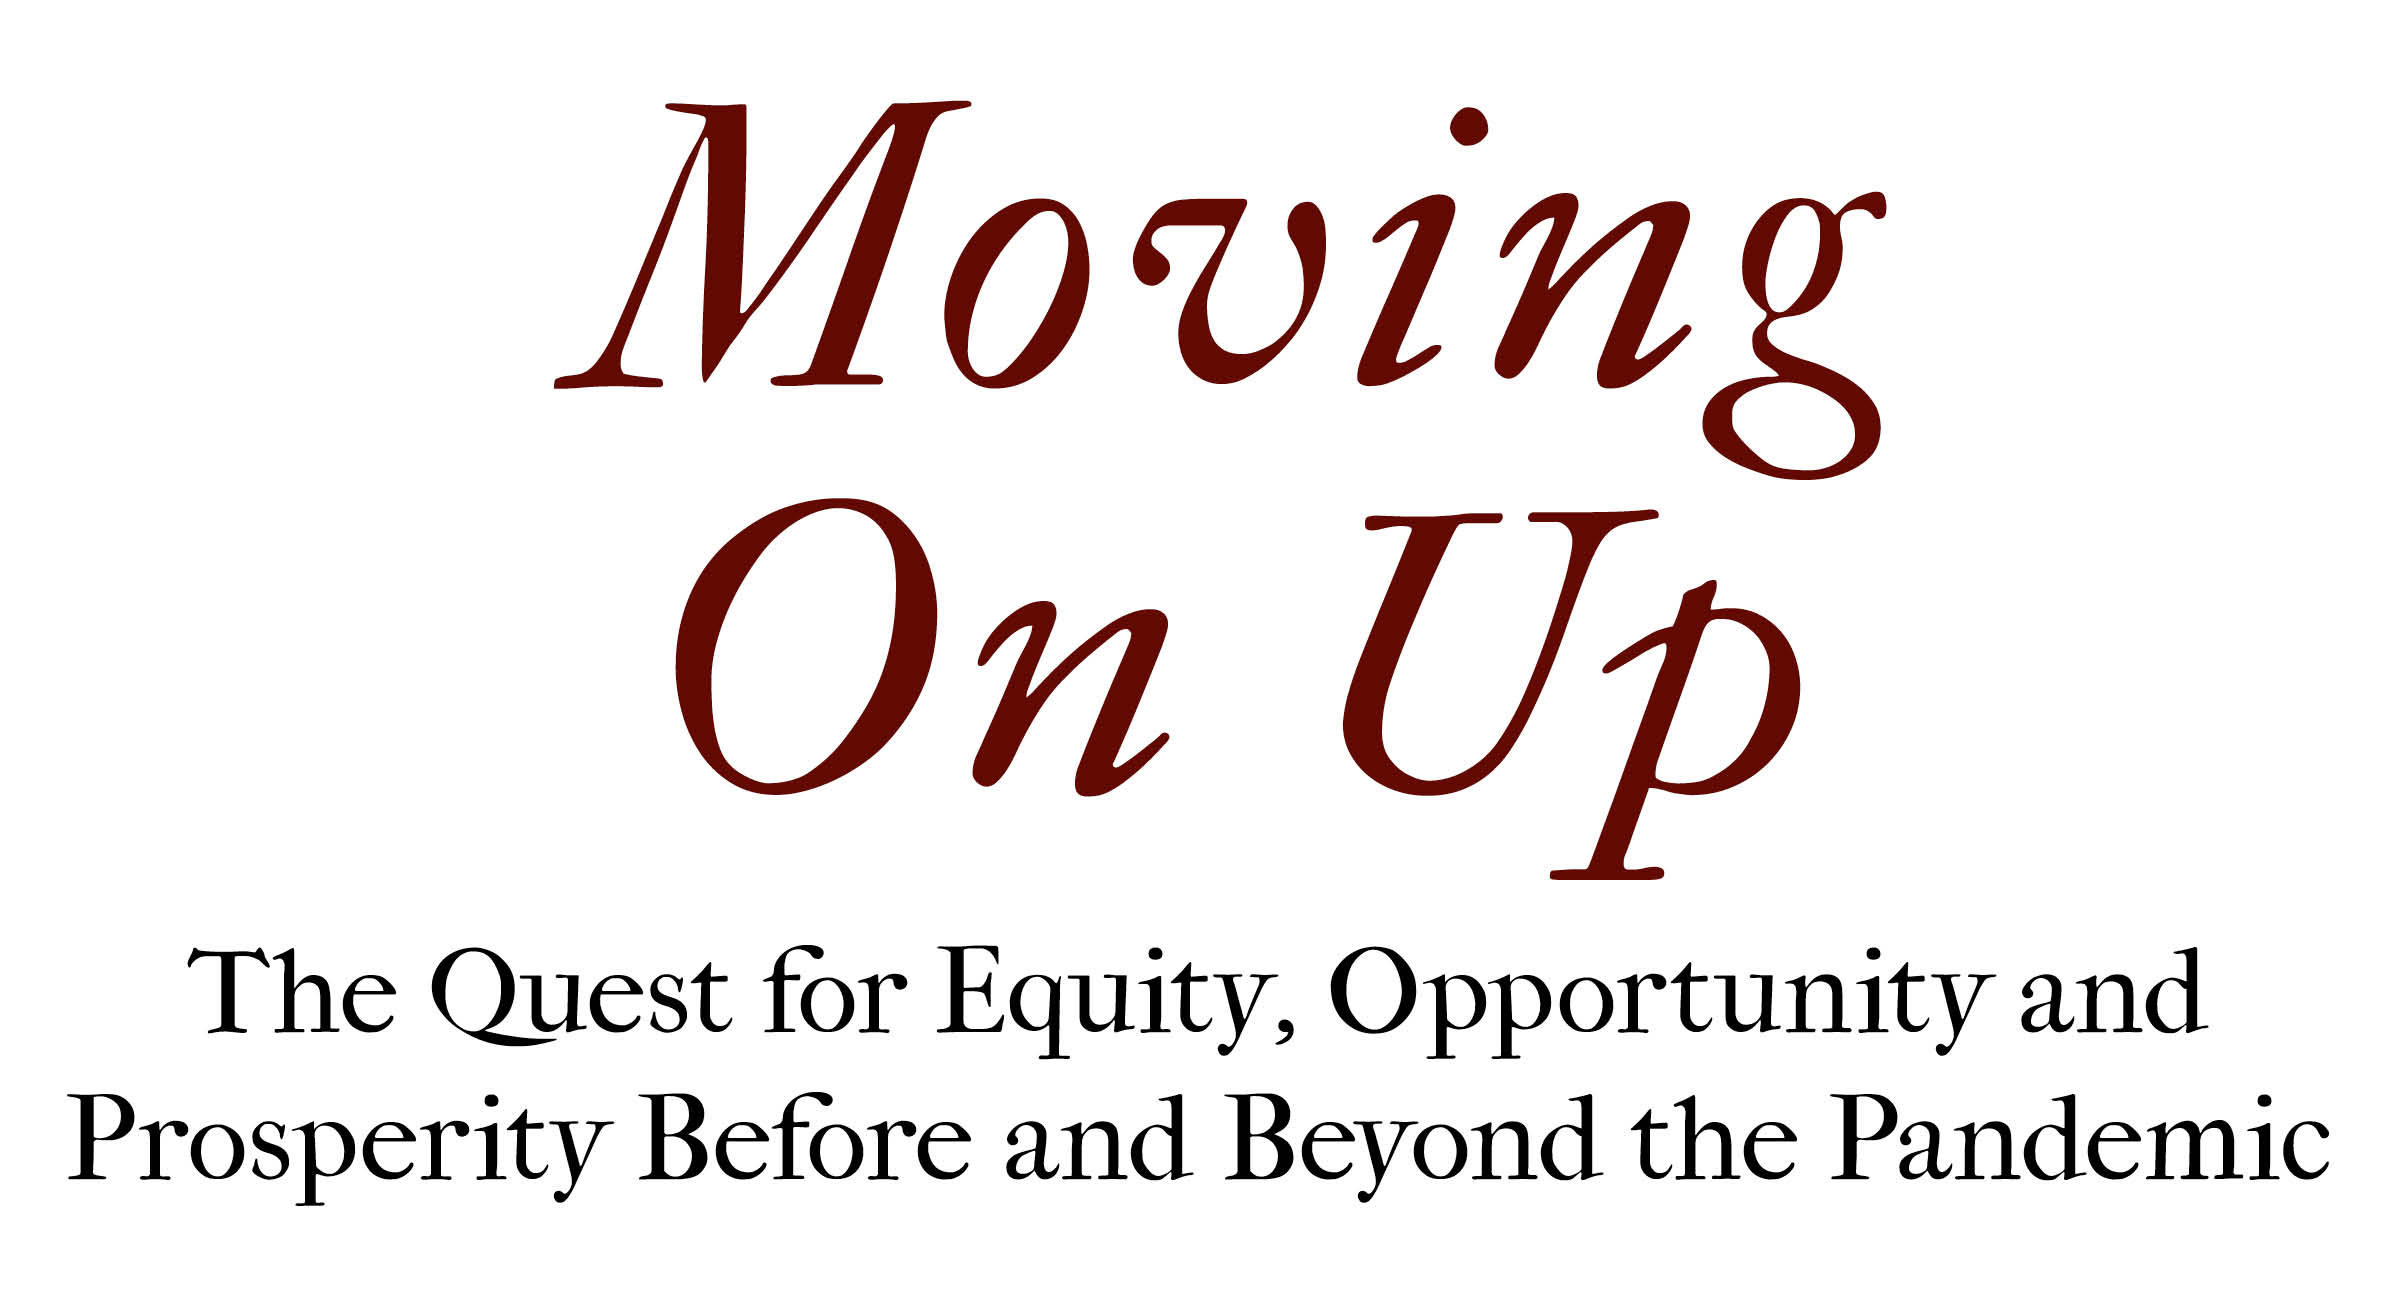 Andy Hargreaves: Moving On Up Webinar Series